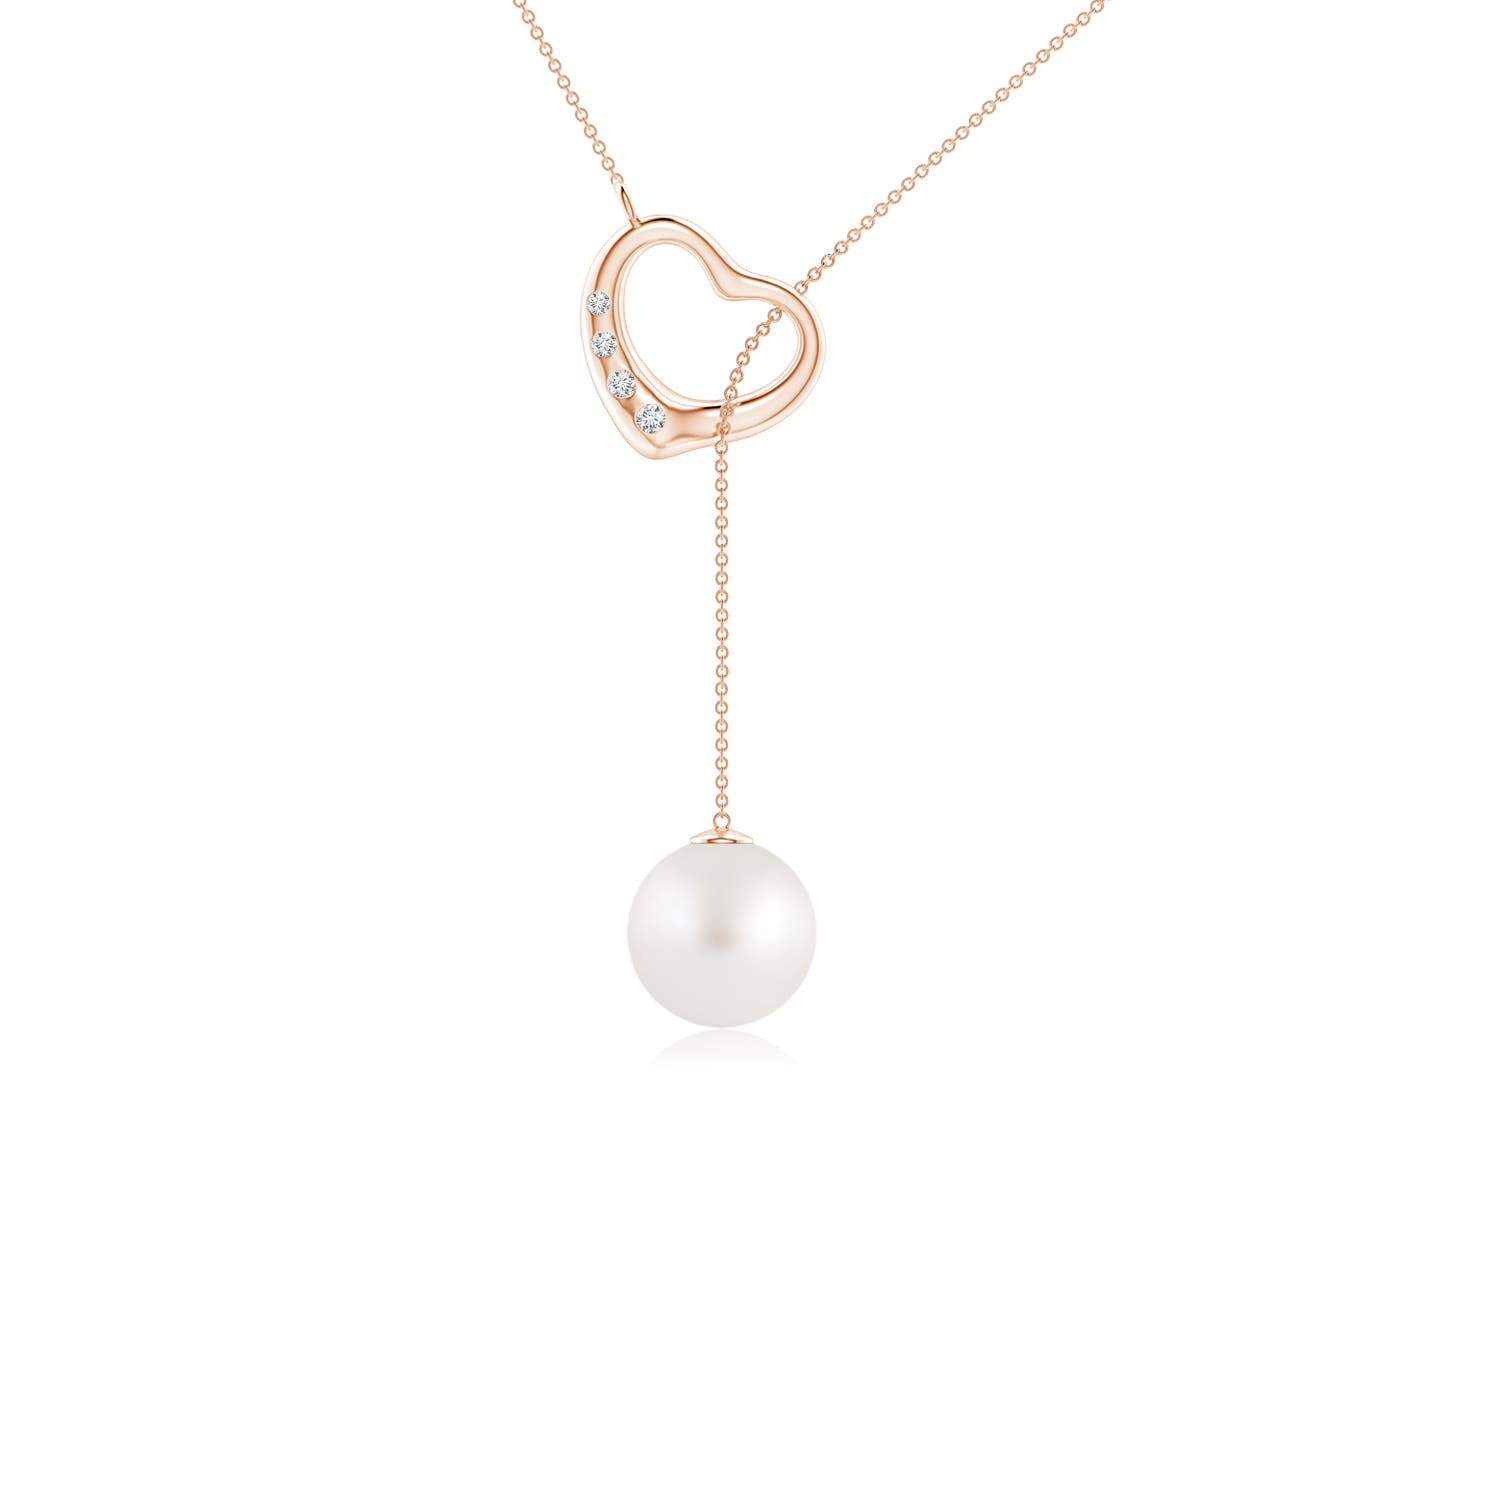 AA - South Sea Cultured Pearl / 3.73 CT / 14 KT Rose Gold